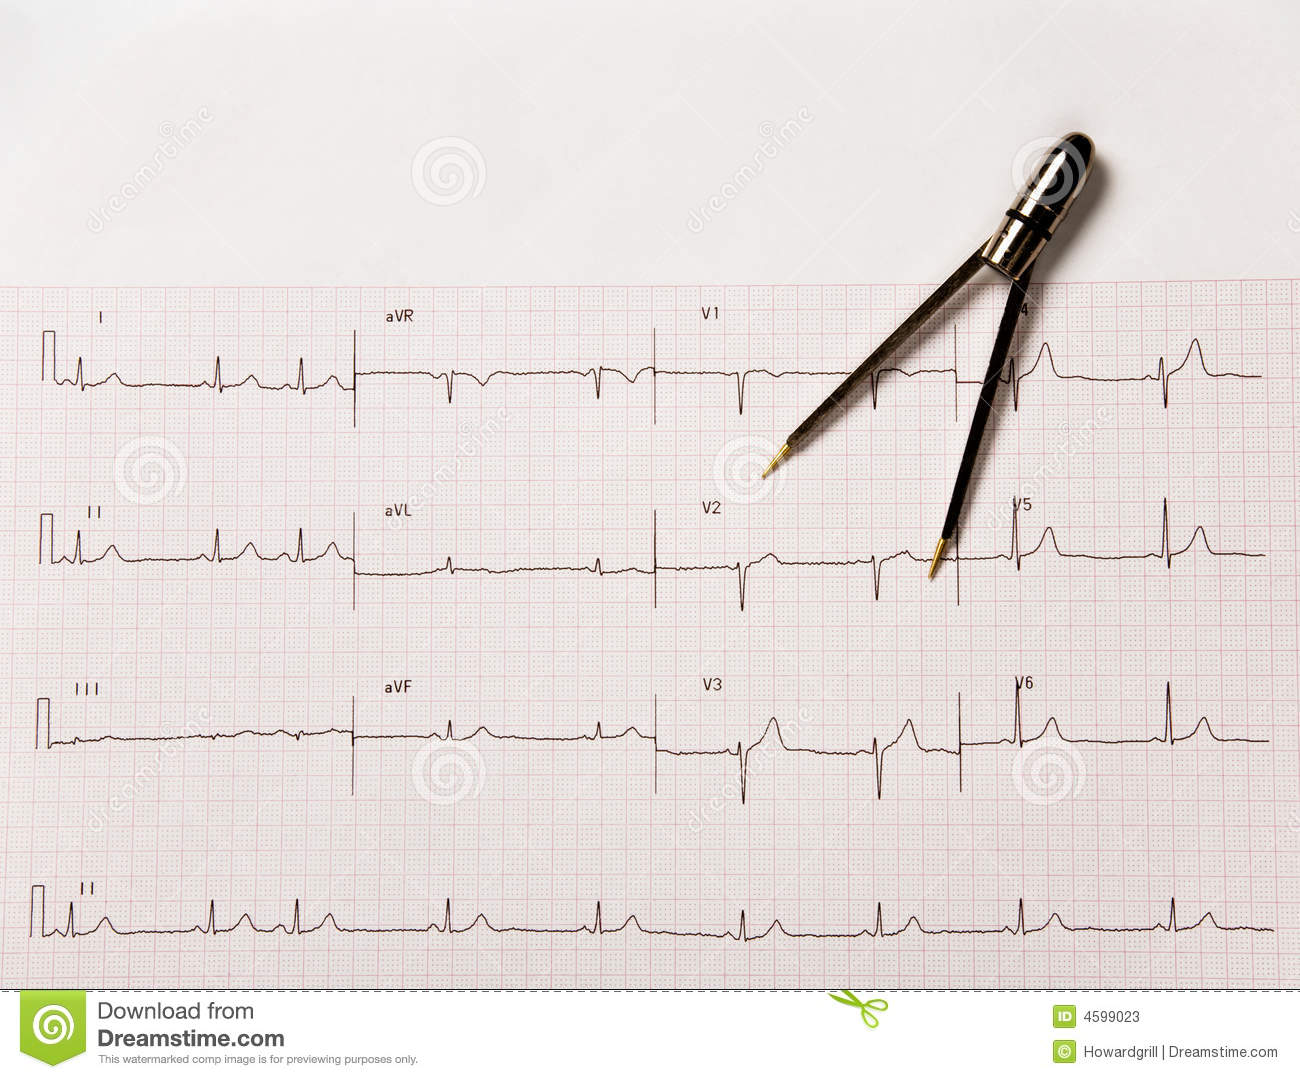 Electrocardiogram Or Ekg With Calipers Stock Photos   Image  4599023